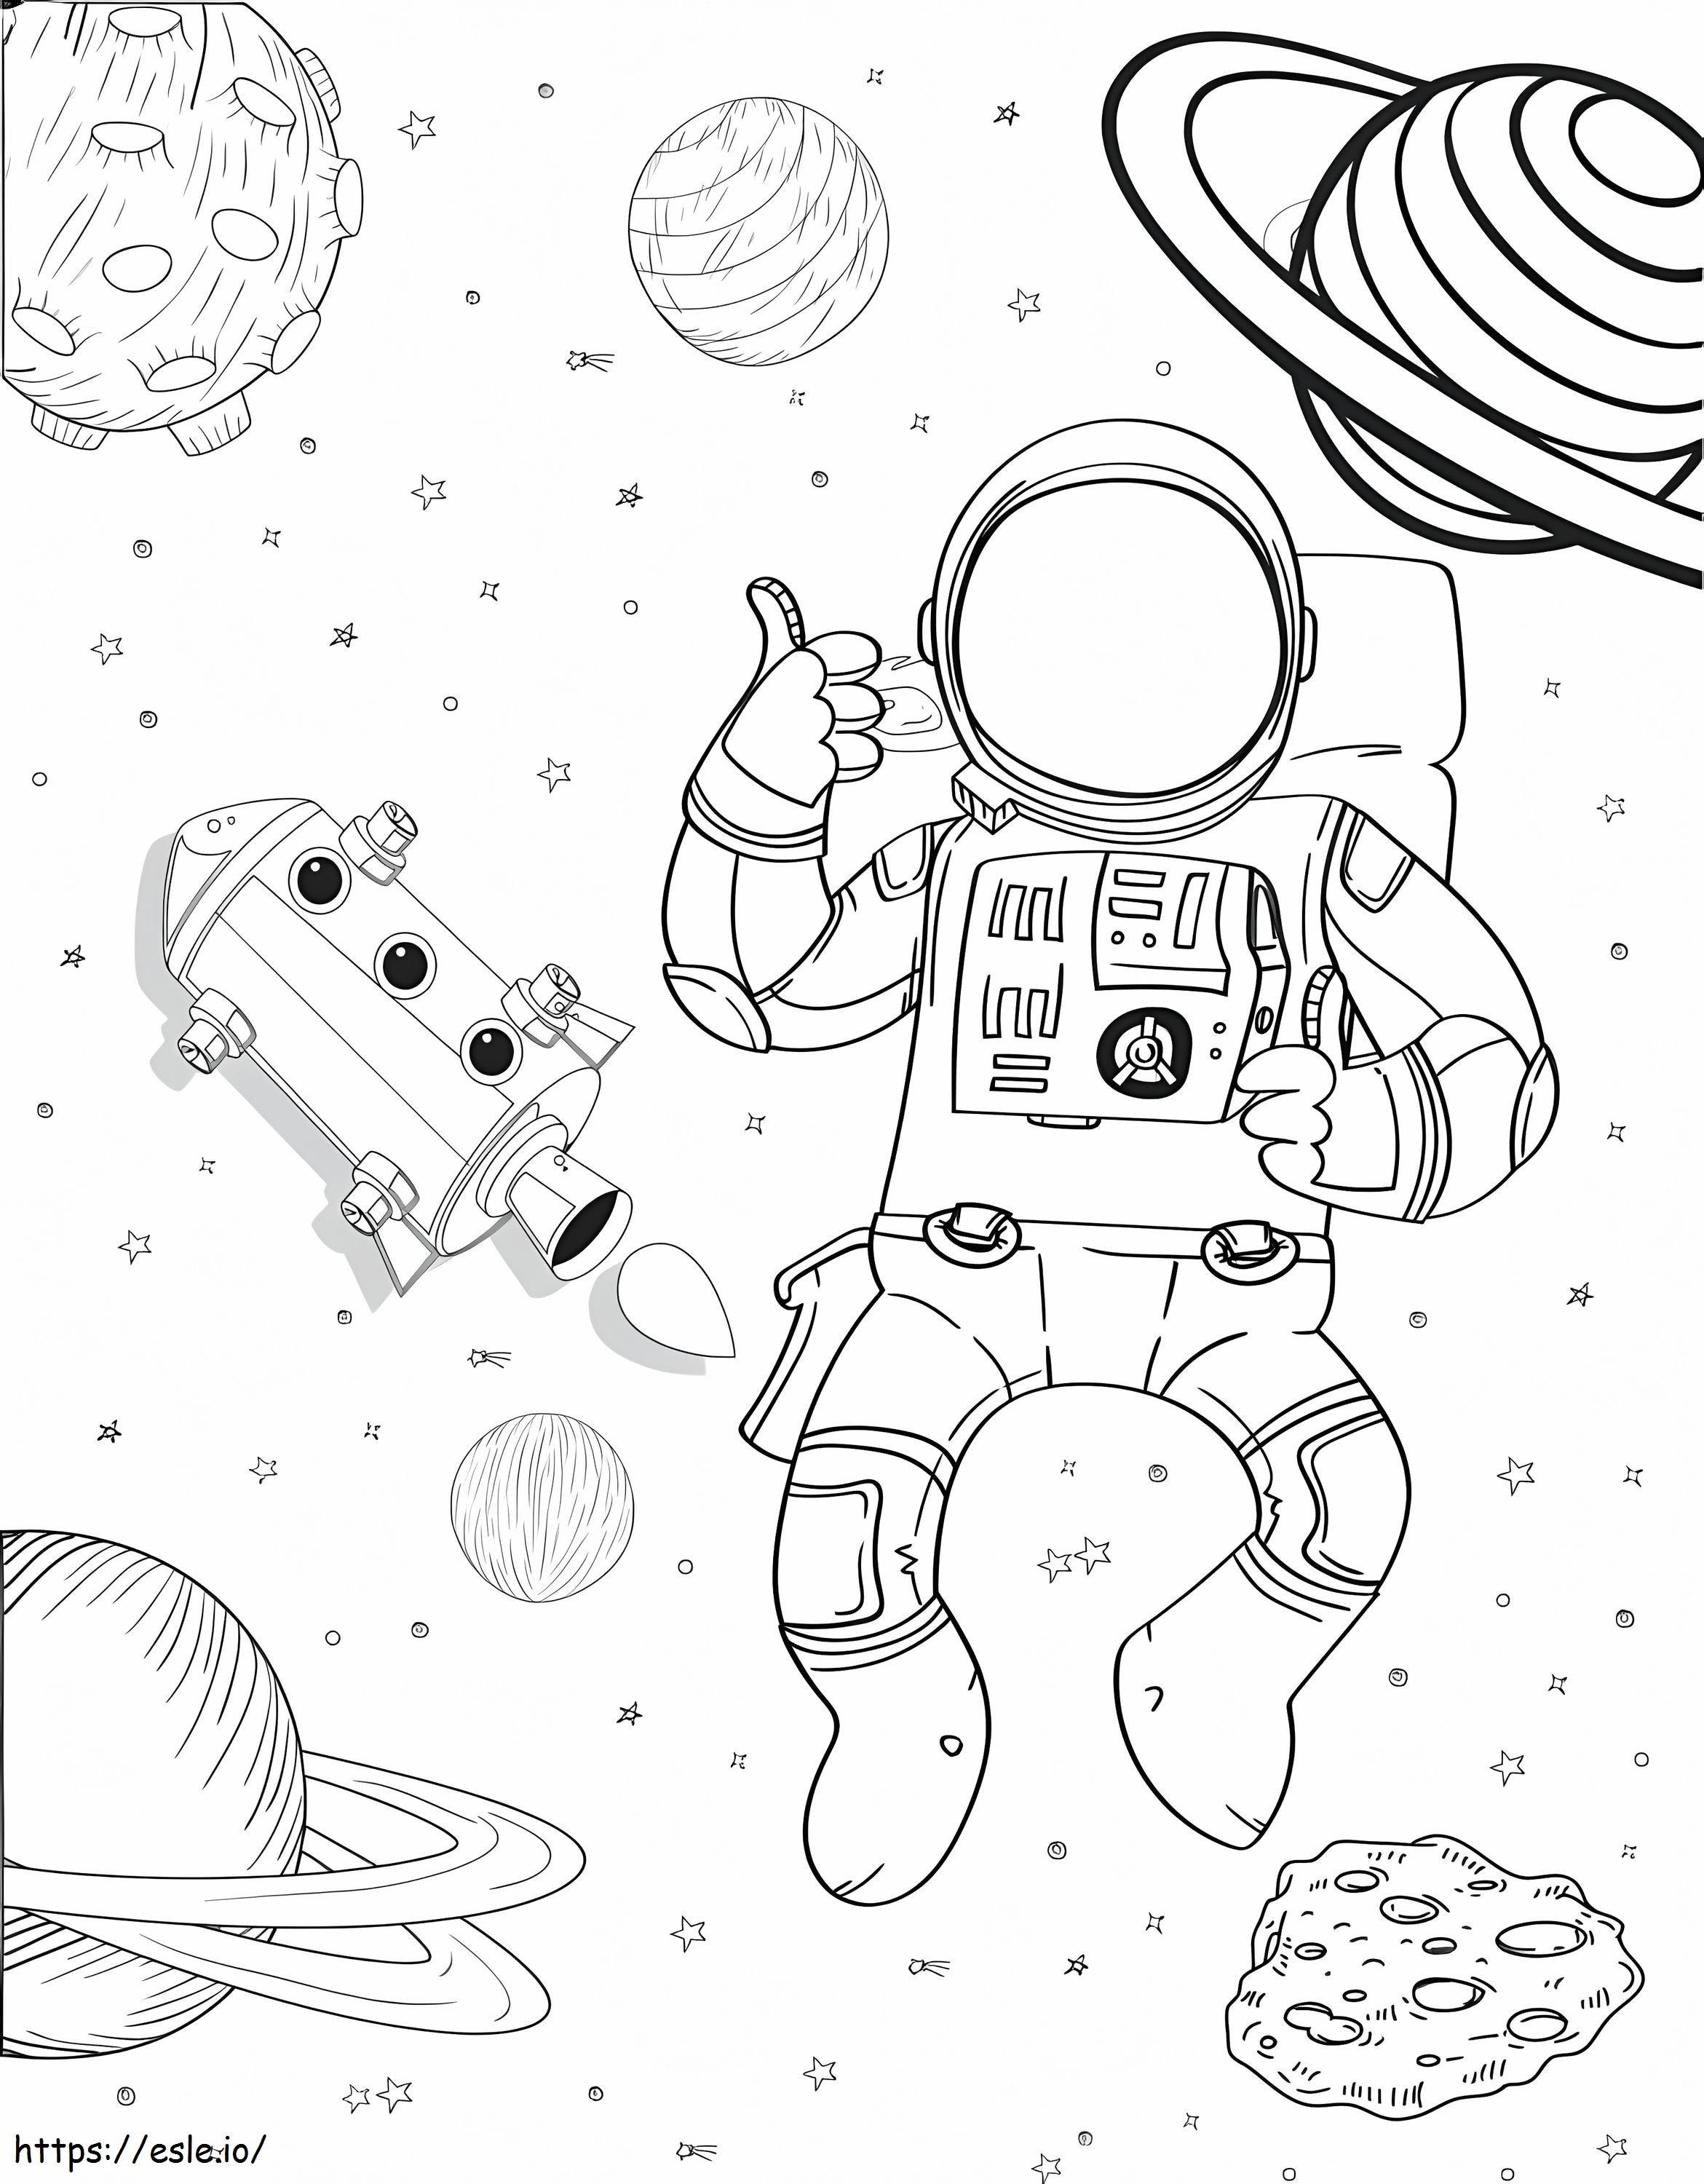 The Perfect Astronaut coloring page